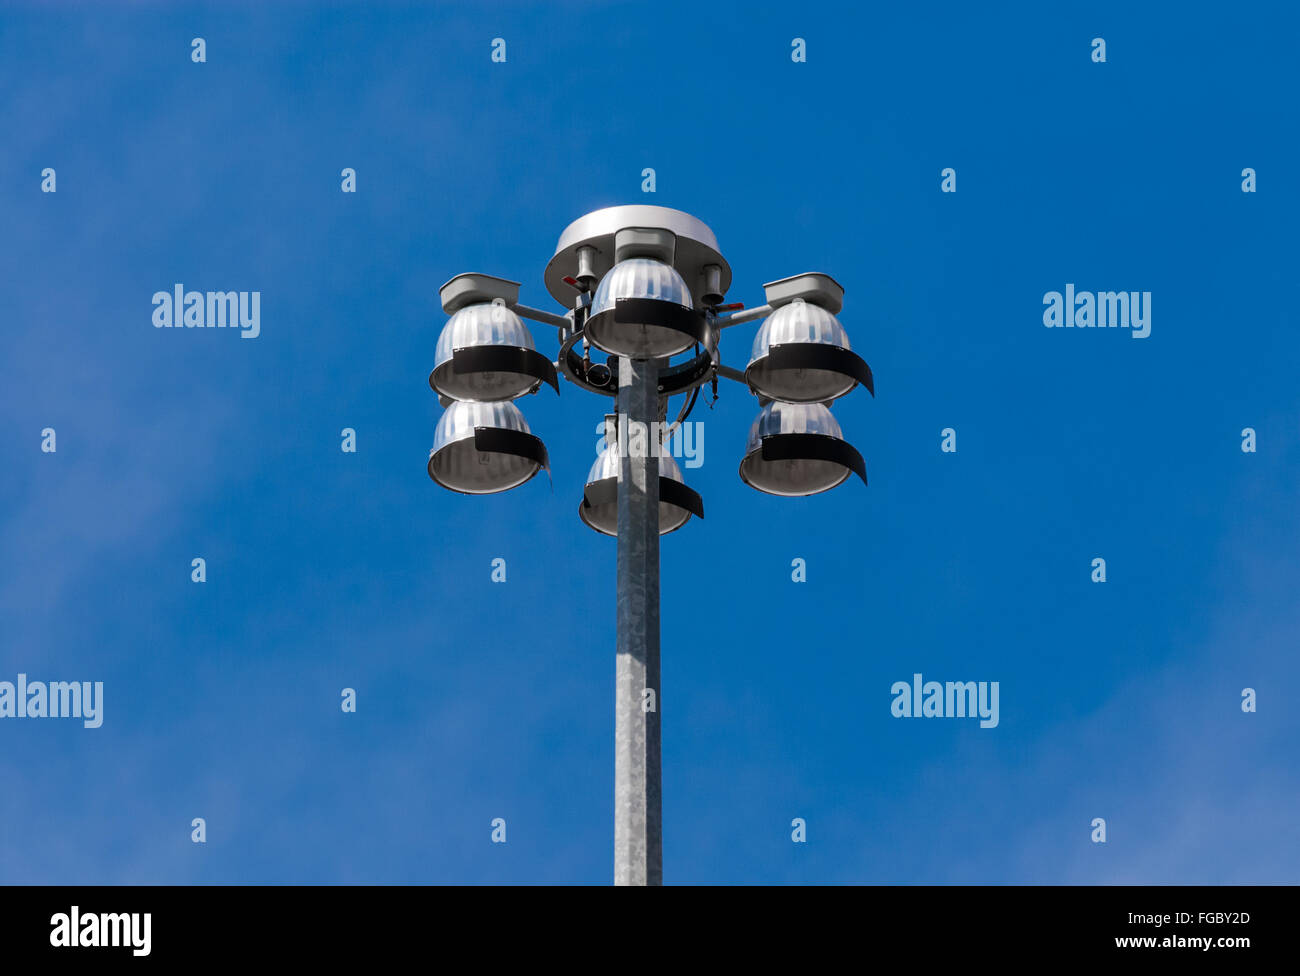 Top of metallic flood lights on metal pole, with six lights pointing down, against blue sky. Stock Photo